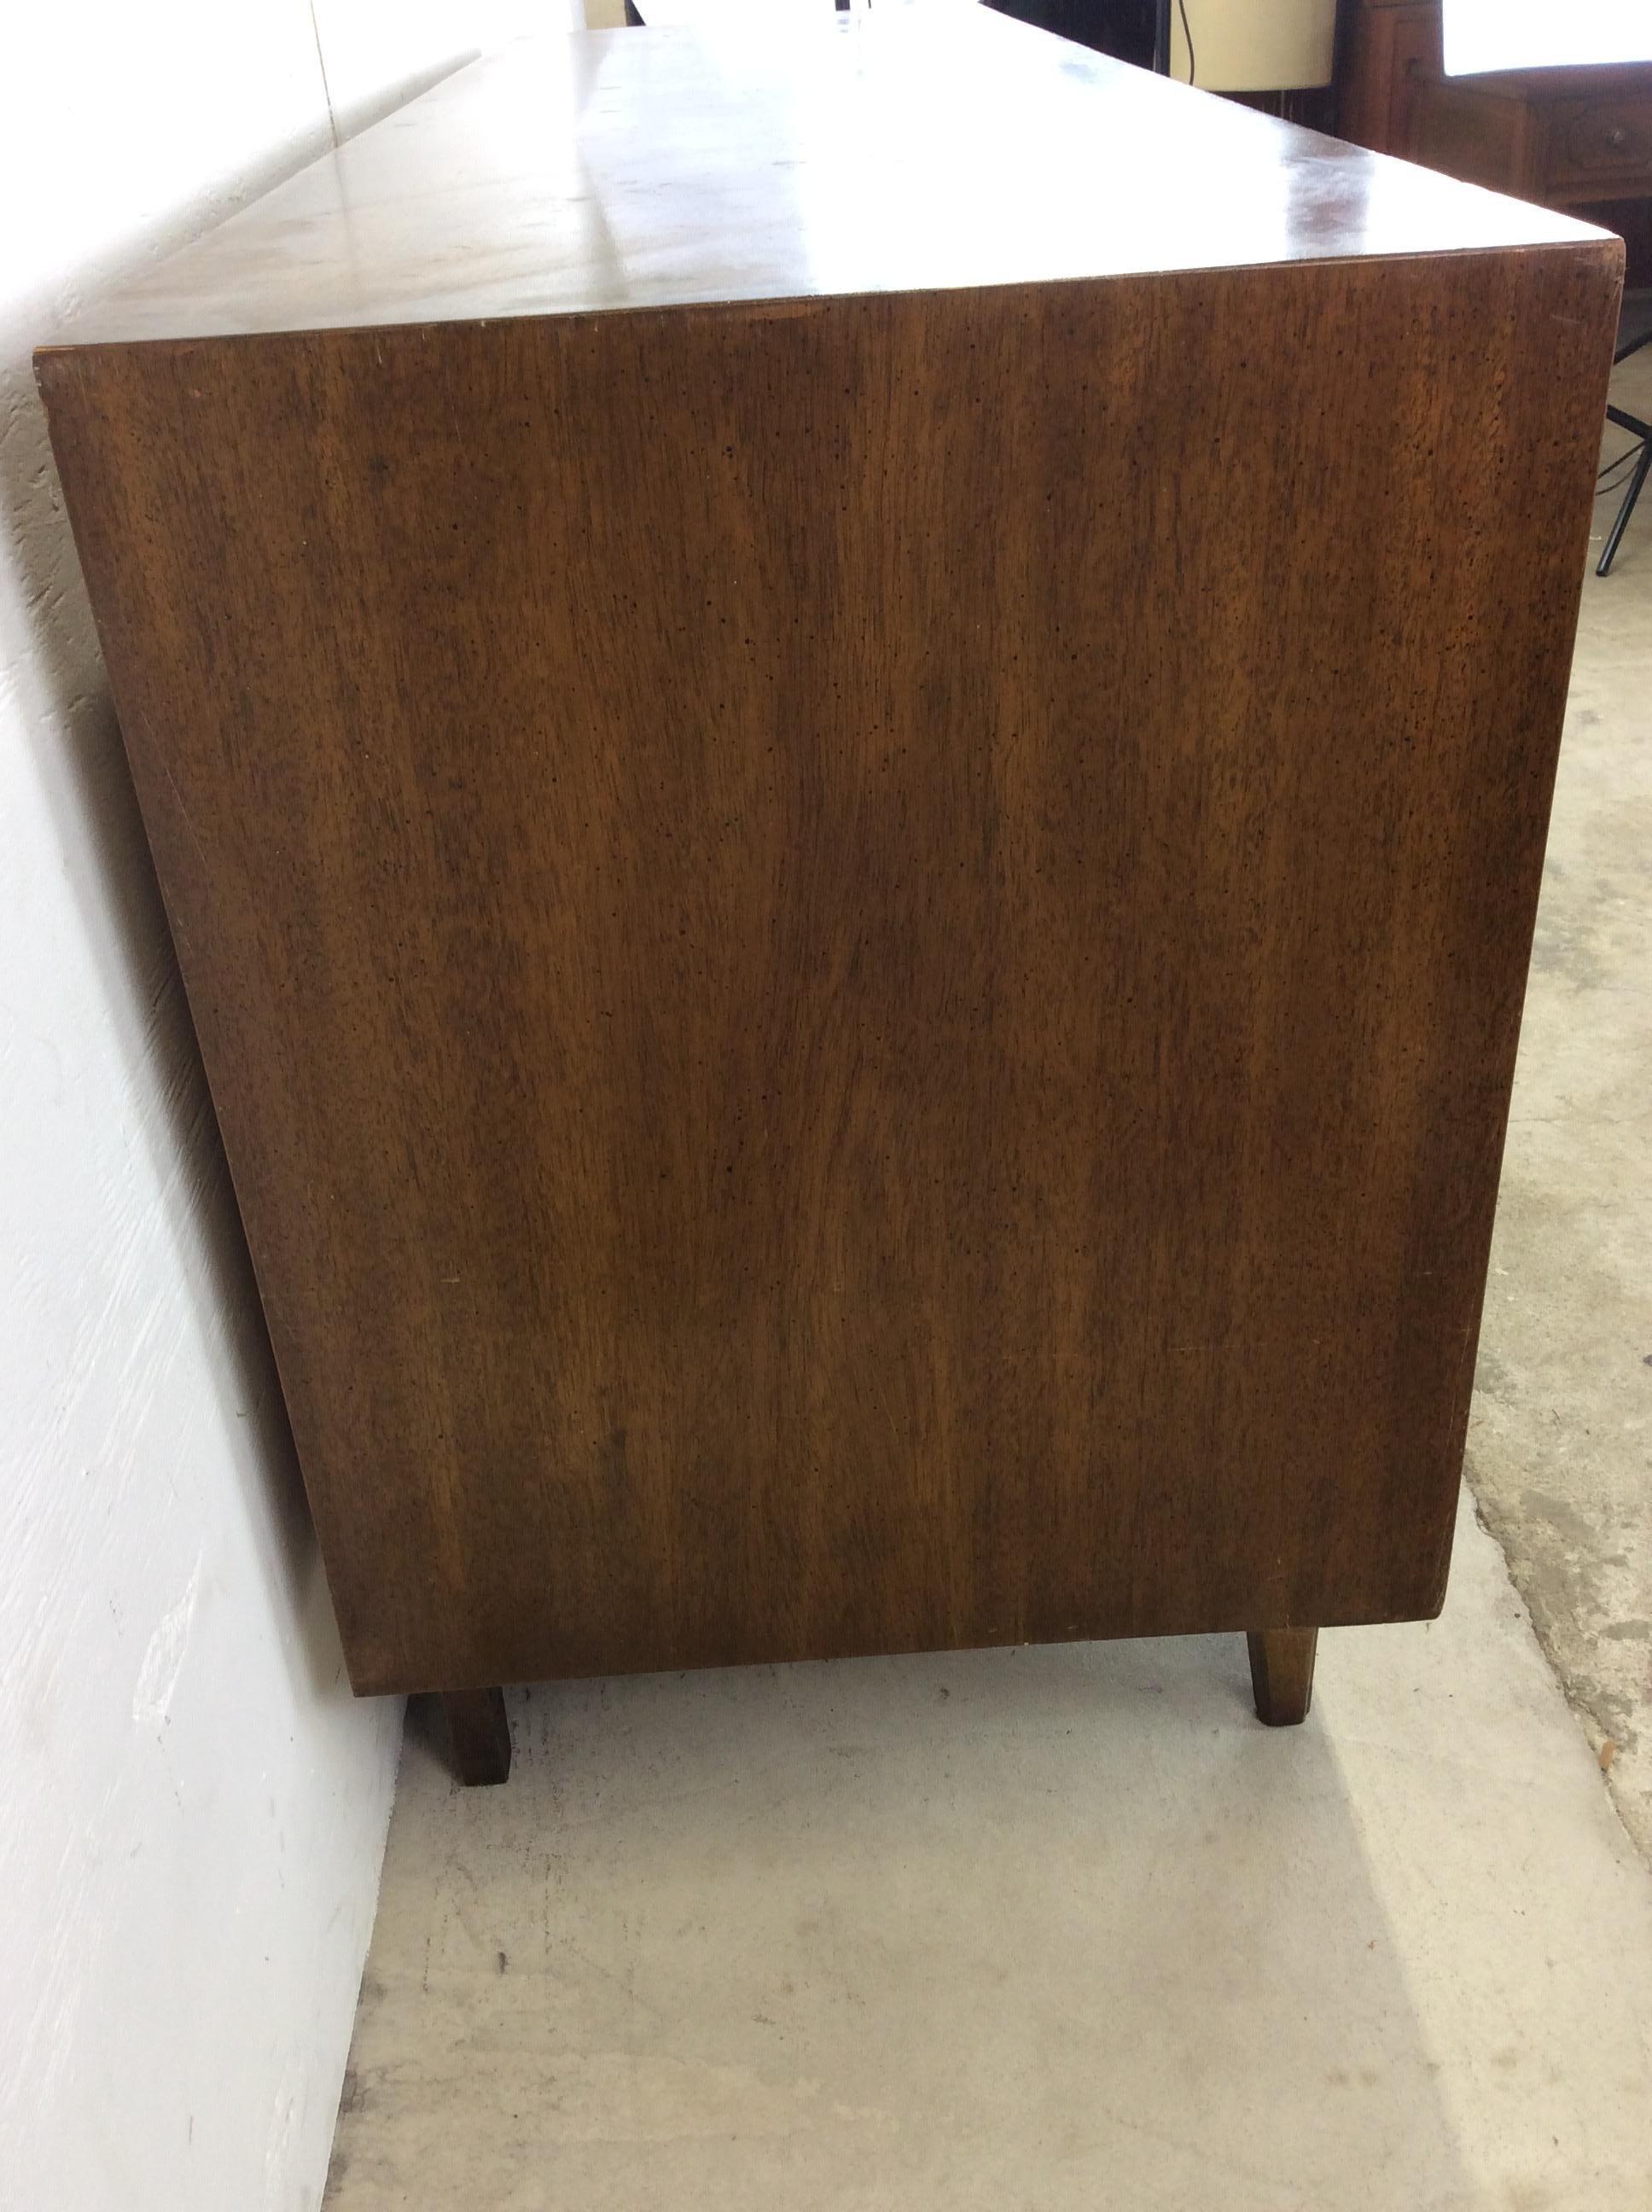 Mid-Century Modern Lowboy Dresser with Brass Hardware In Good Condition For Sale In Freehold, NJ